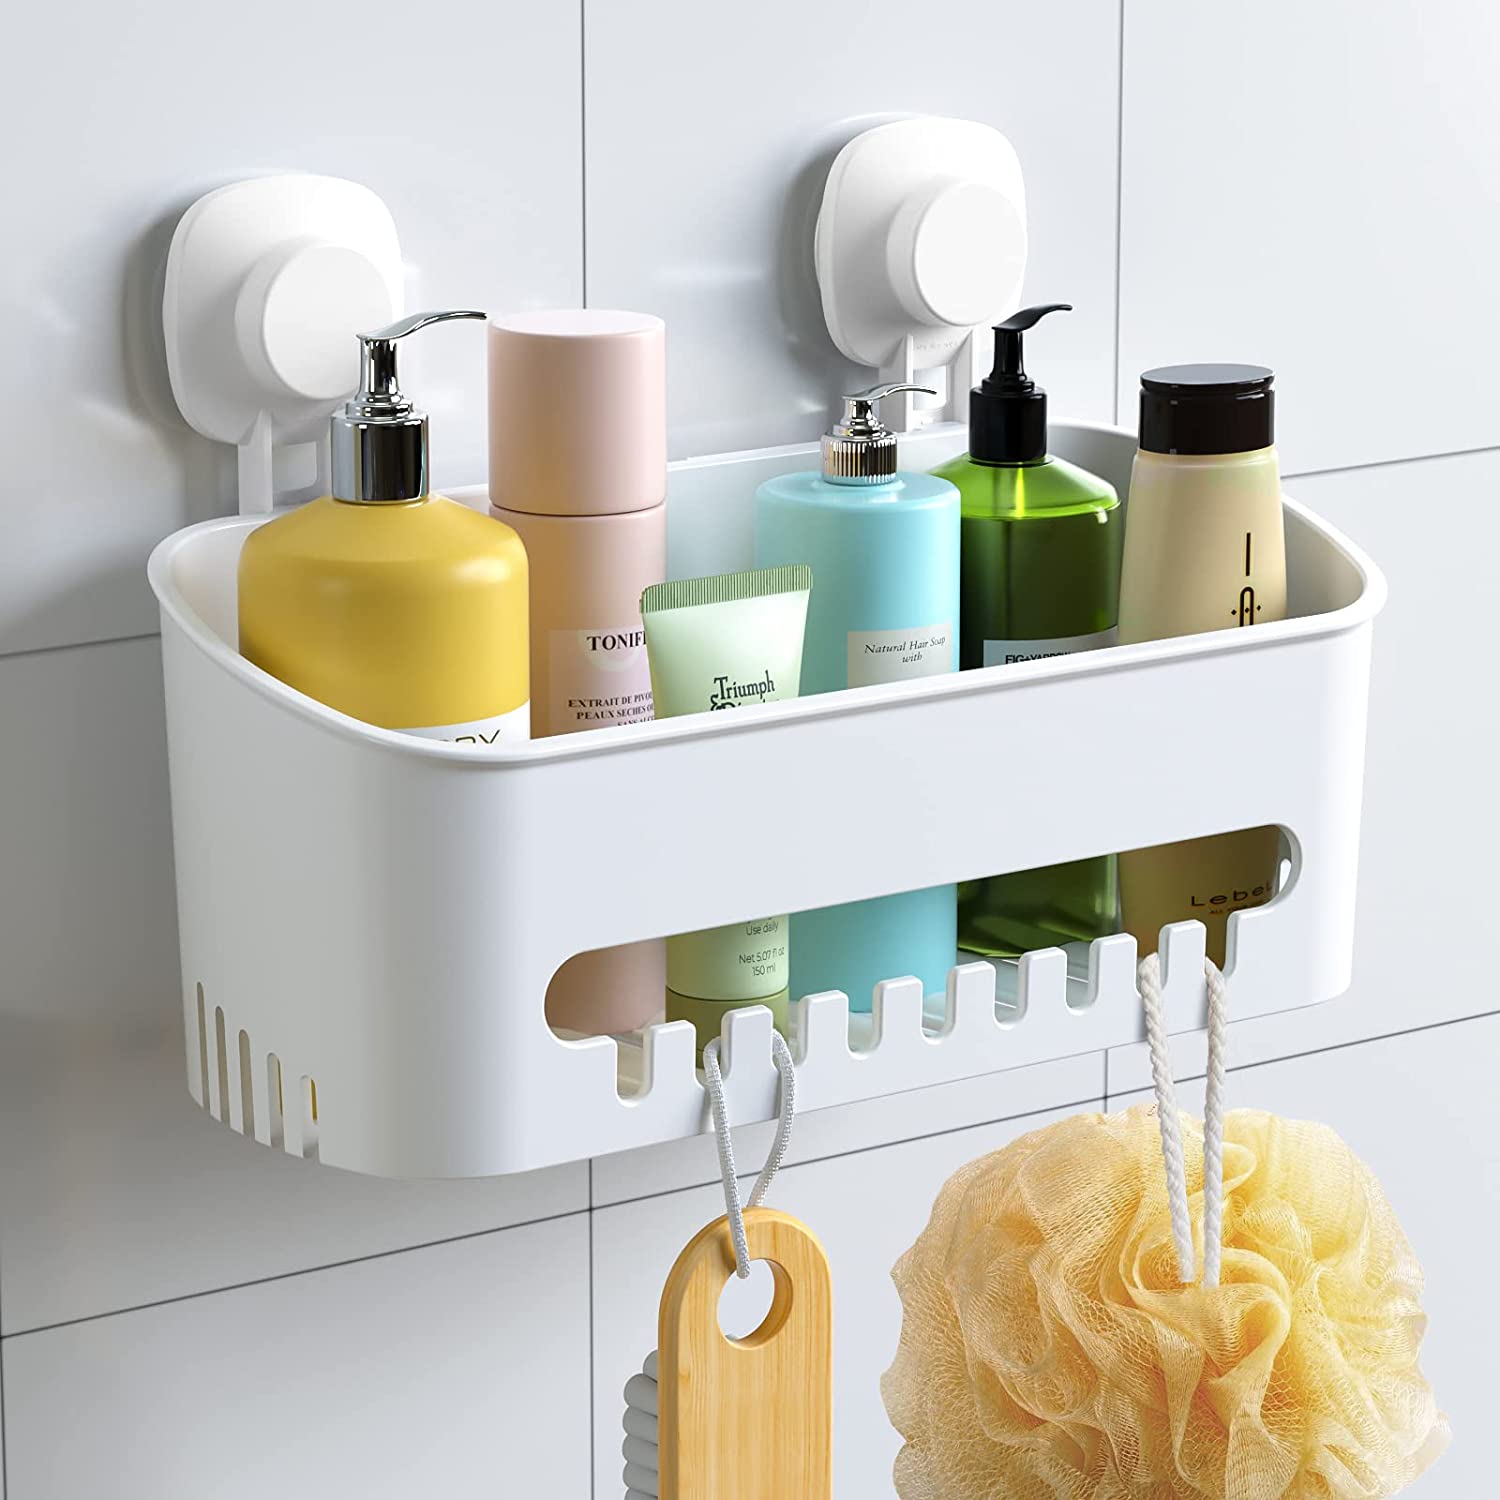  8. Luxear Wall Mounted Shower Caddy 